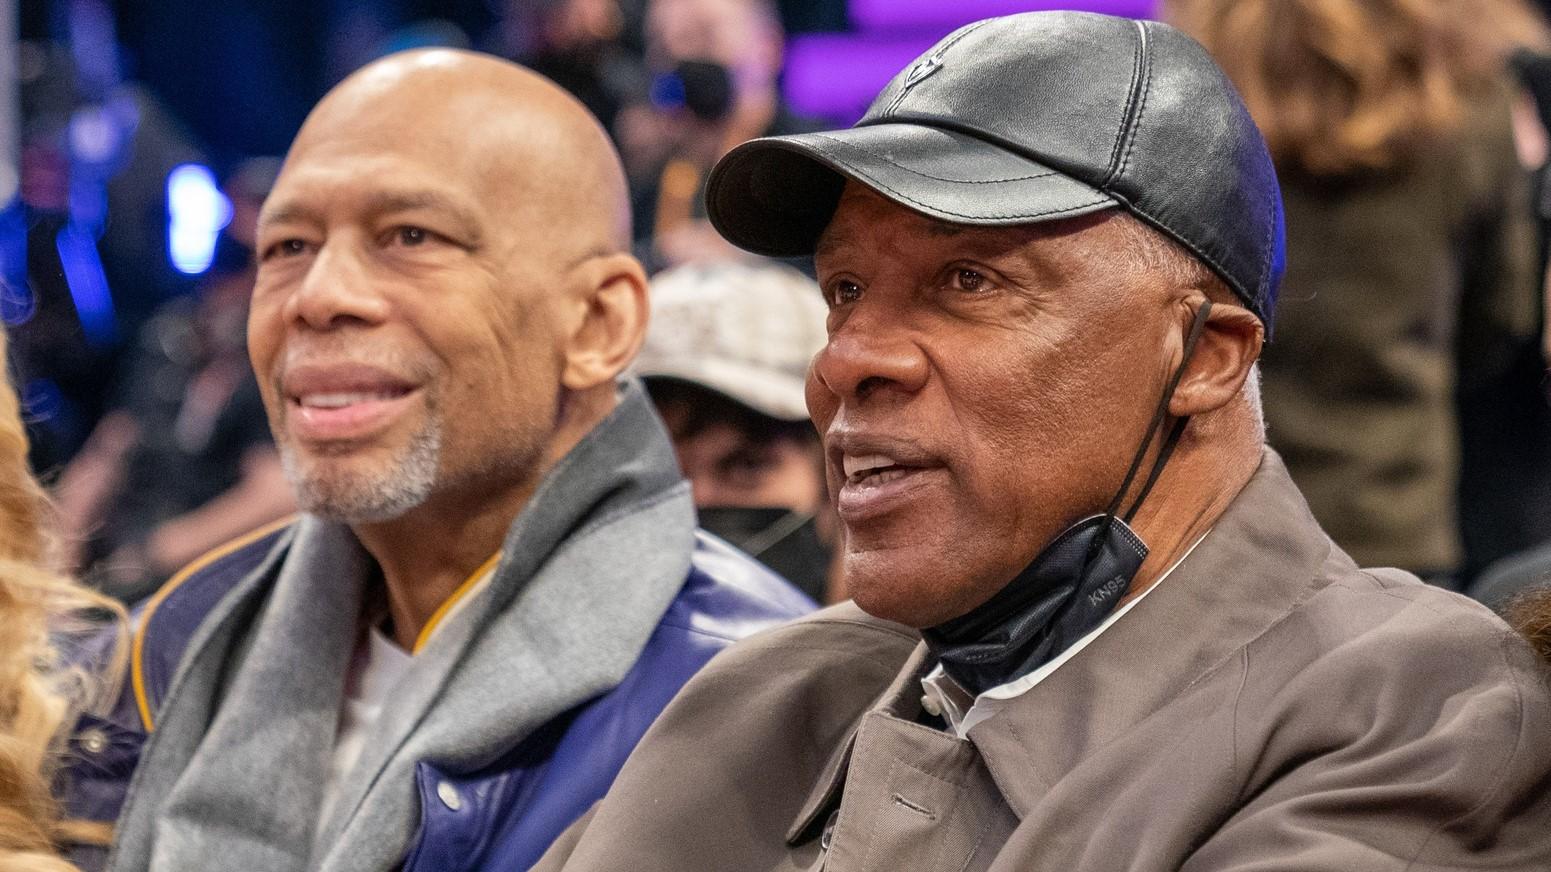 February 19, 2022; Cleveland, OH, USA; NBA great Kareem Abdul-Jabbar (left) and NBA great Julius Erving (right) during the Skills Challenge during the 2022 NBA All-Star Saturday Night at Rocket Mortgage Field House. / Kyle Terada-USA TODAY Sports